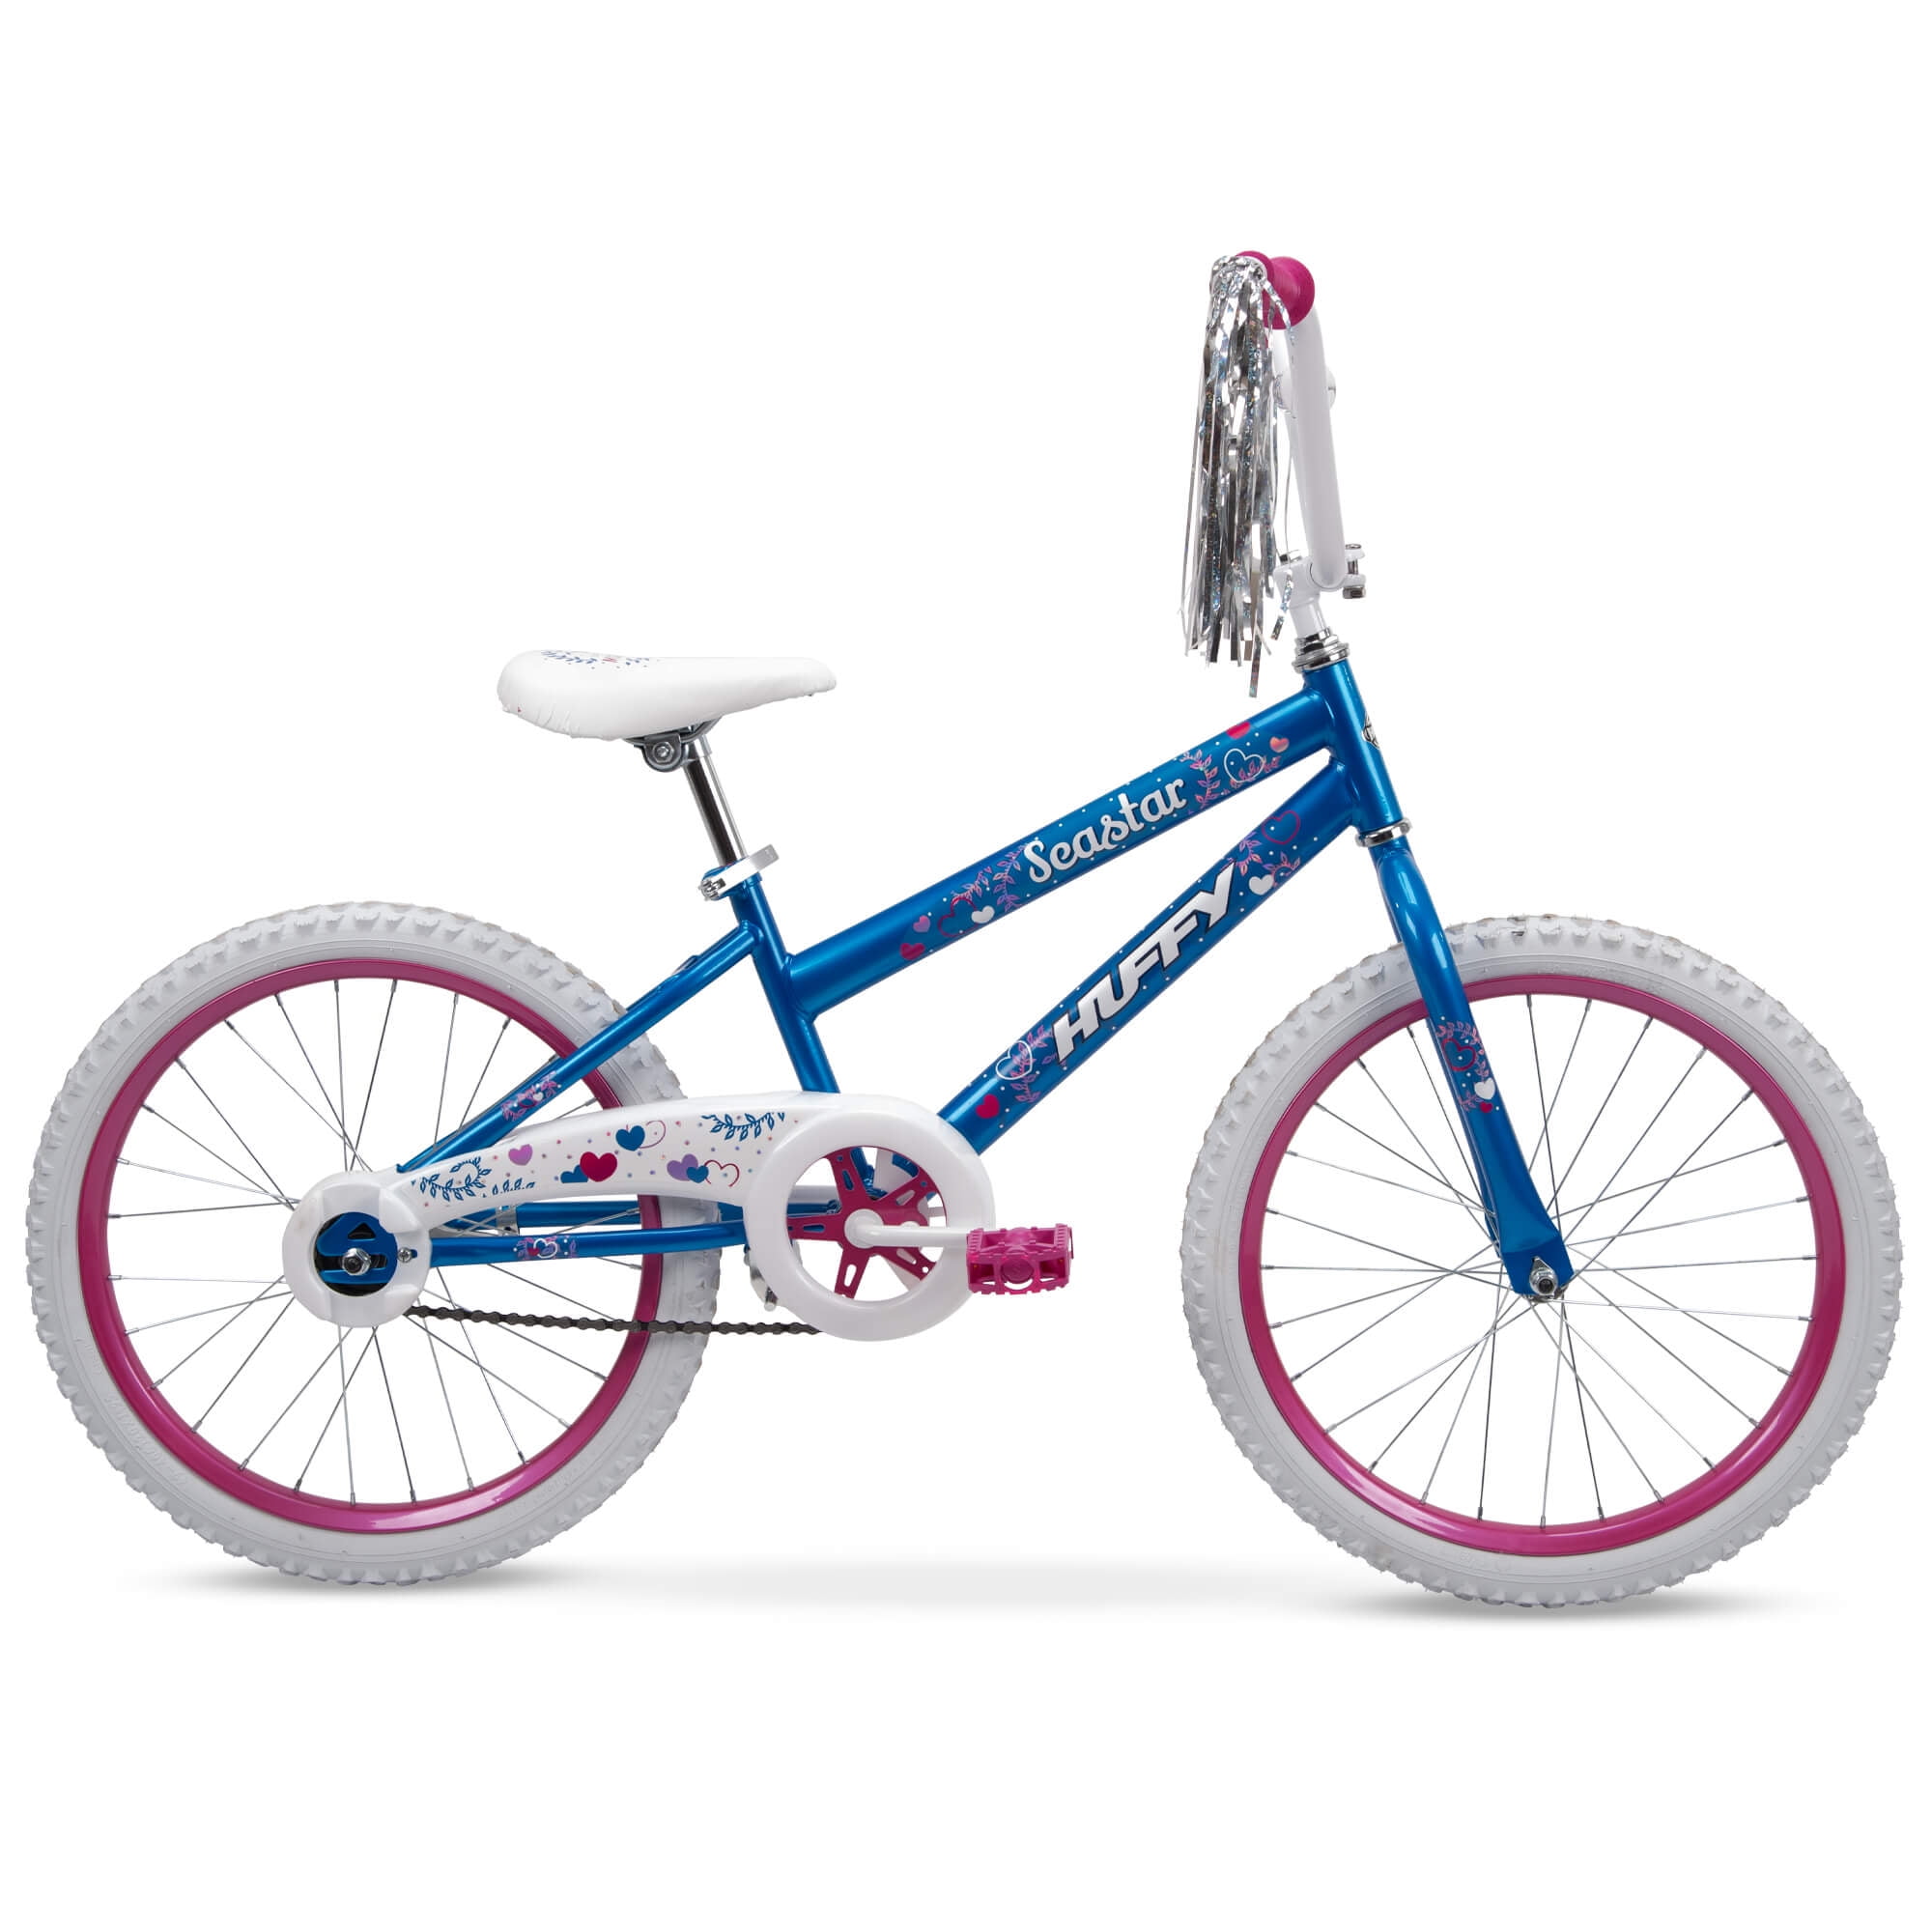 Details about   20" Sea Star Girls Bike Kids Bicycle Pink for 5-9 years old Durable Steel Frame